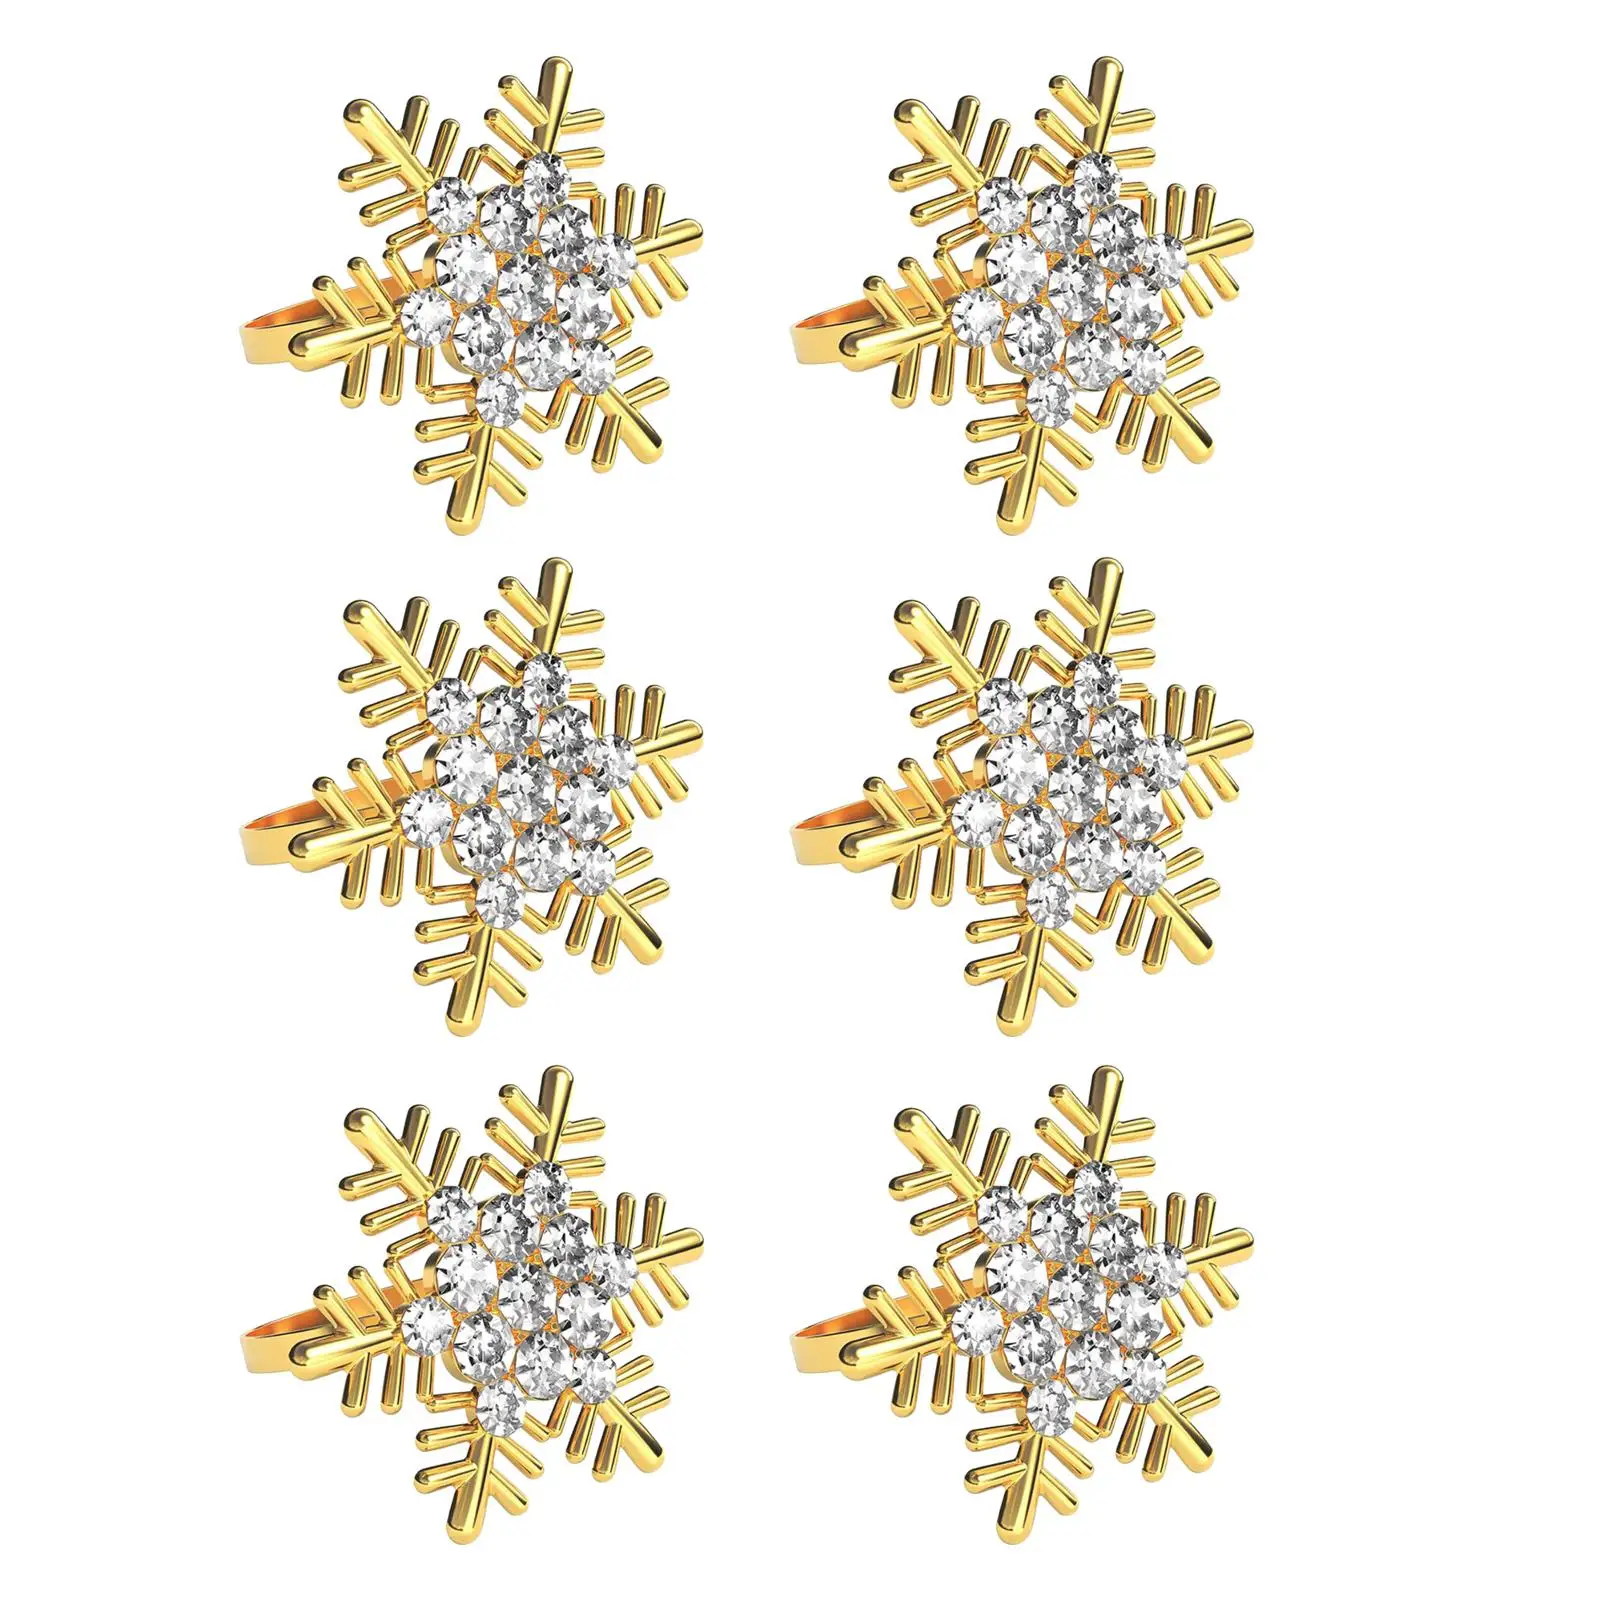 6x Snowflake Napkin Rings Chic Rhinestone Modern Napkin Buckle Napkin Holders for Thanksgiving Party Banquet Christmas Hotel